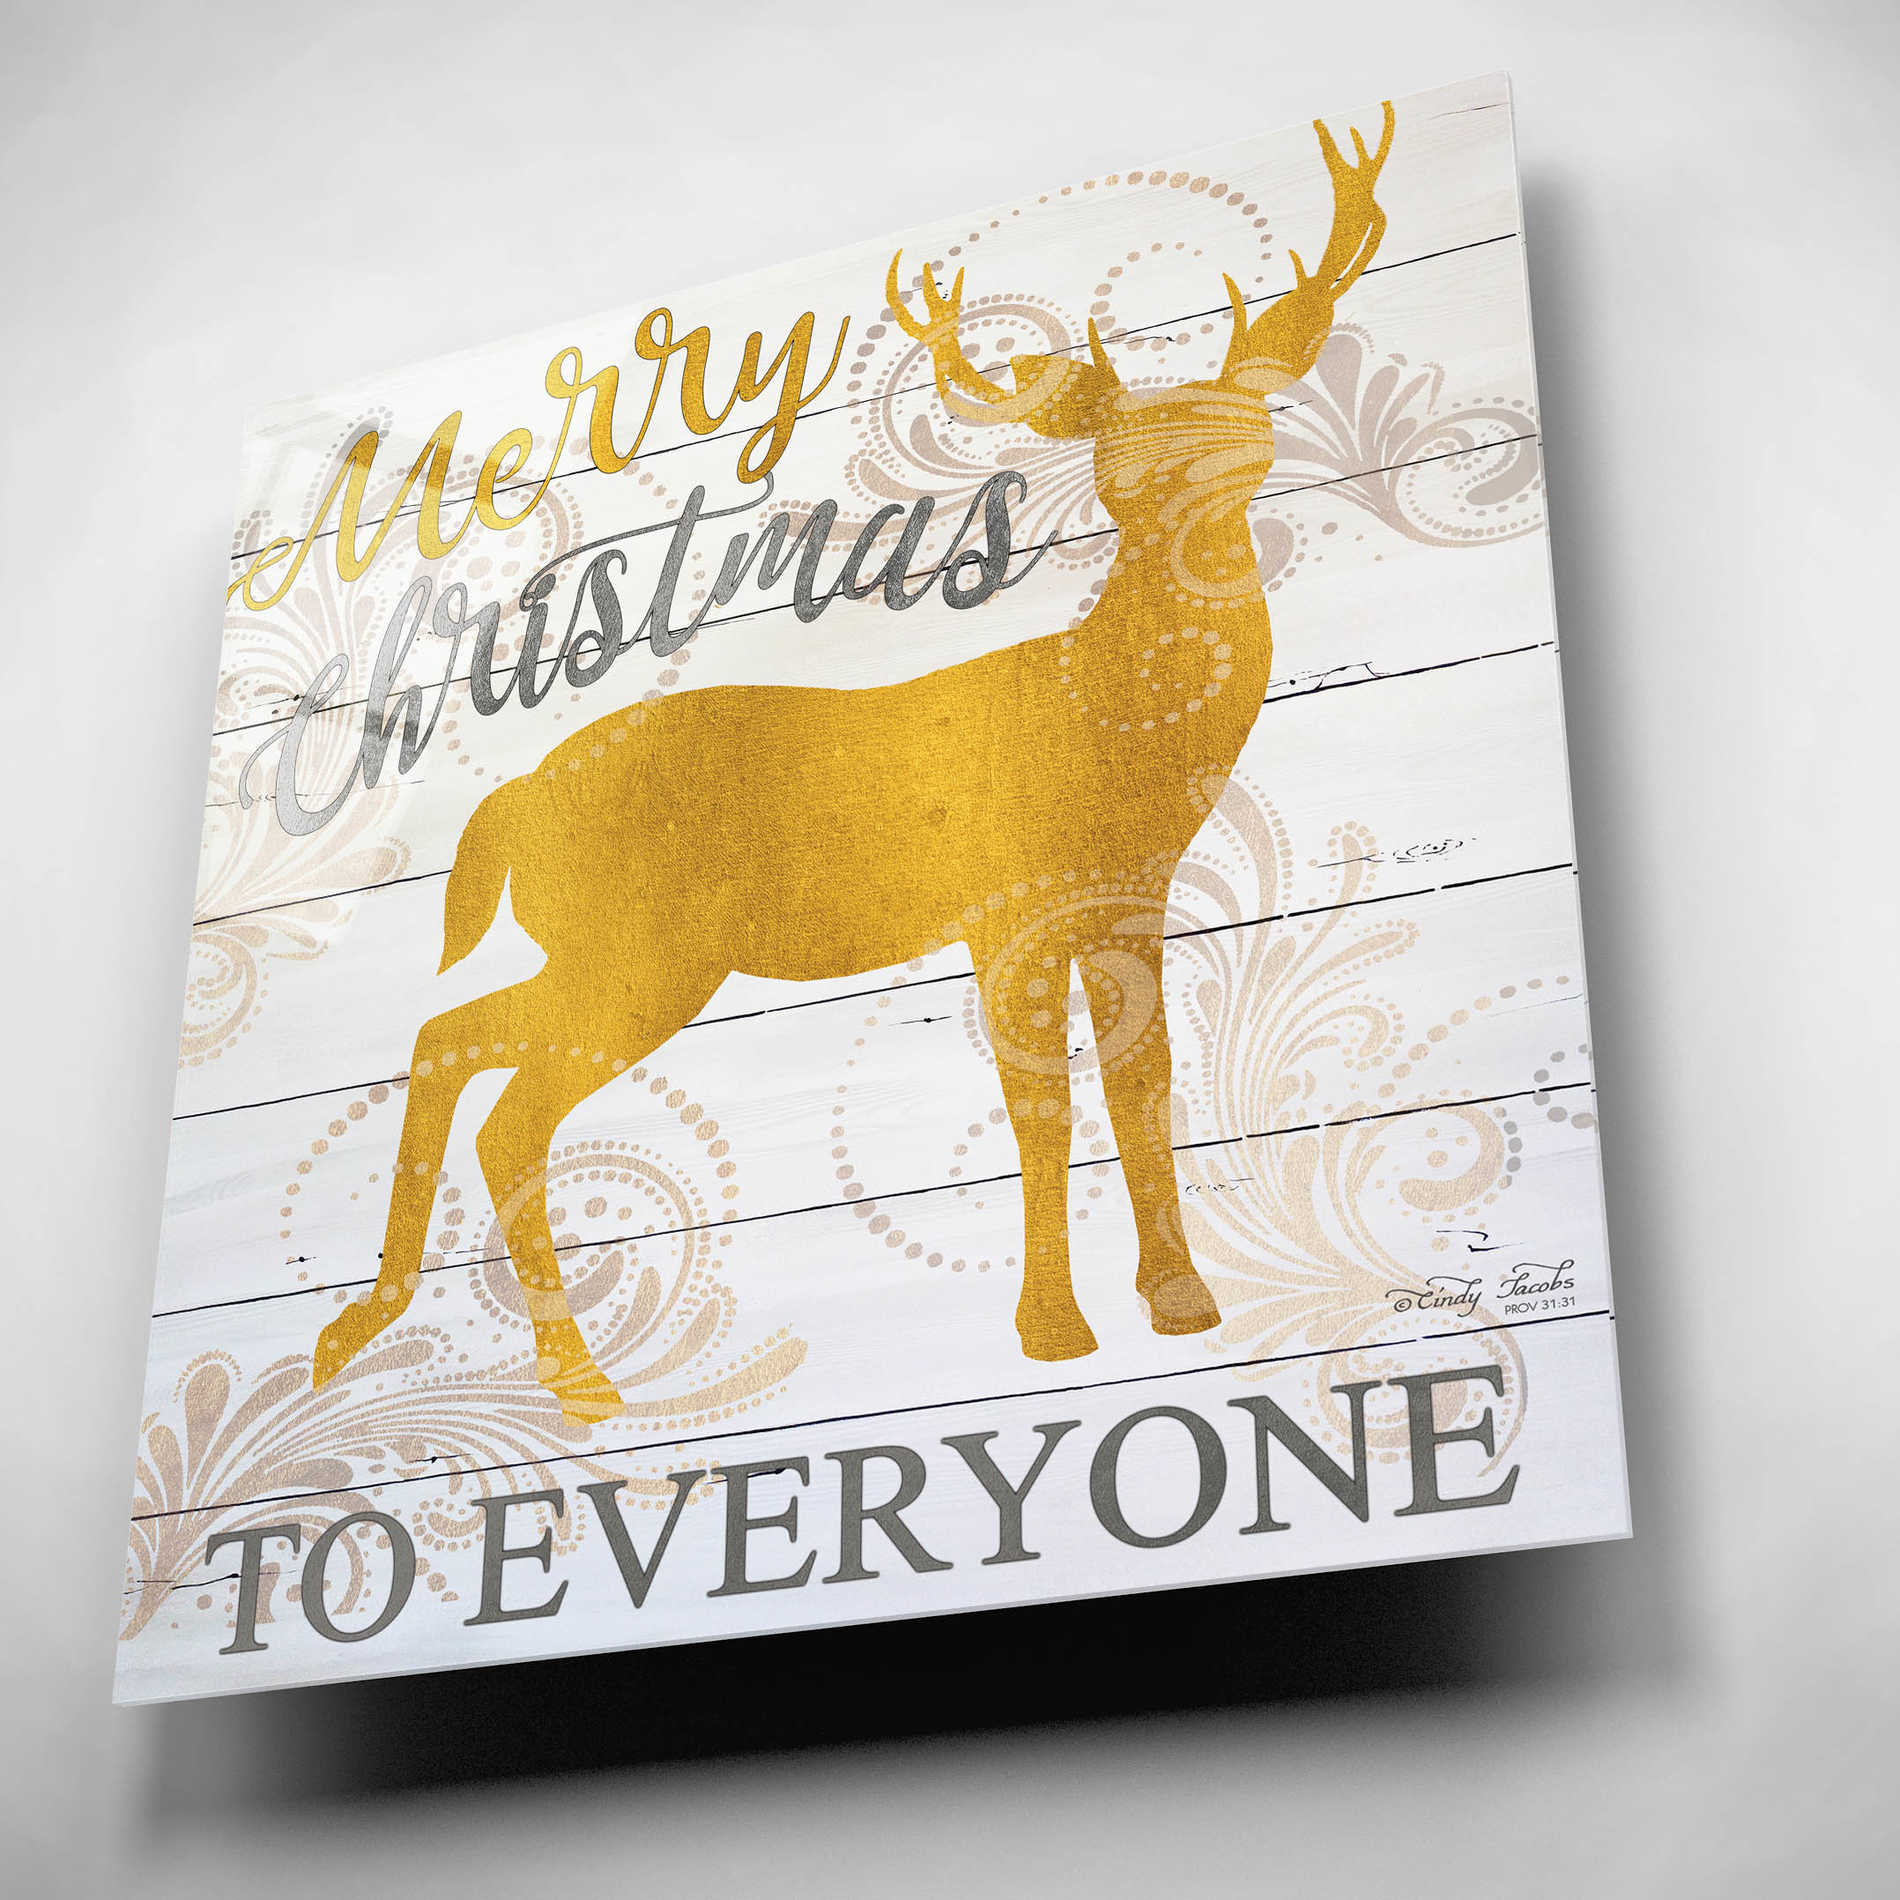 Epic Art 'Merry Christmas to Everyone Deer' by Cindy Jacobs, Acrylic Glass Wall Art,12x12